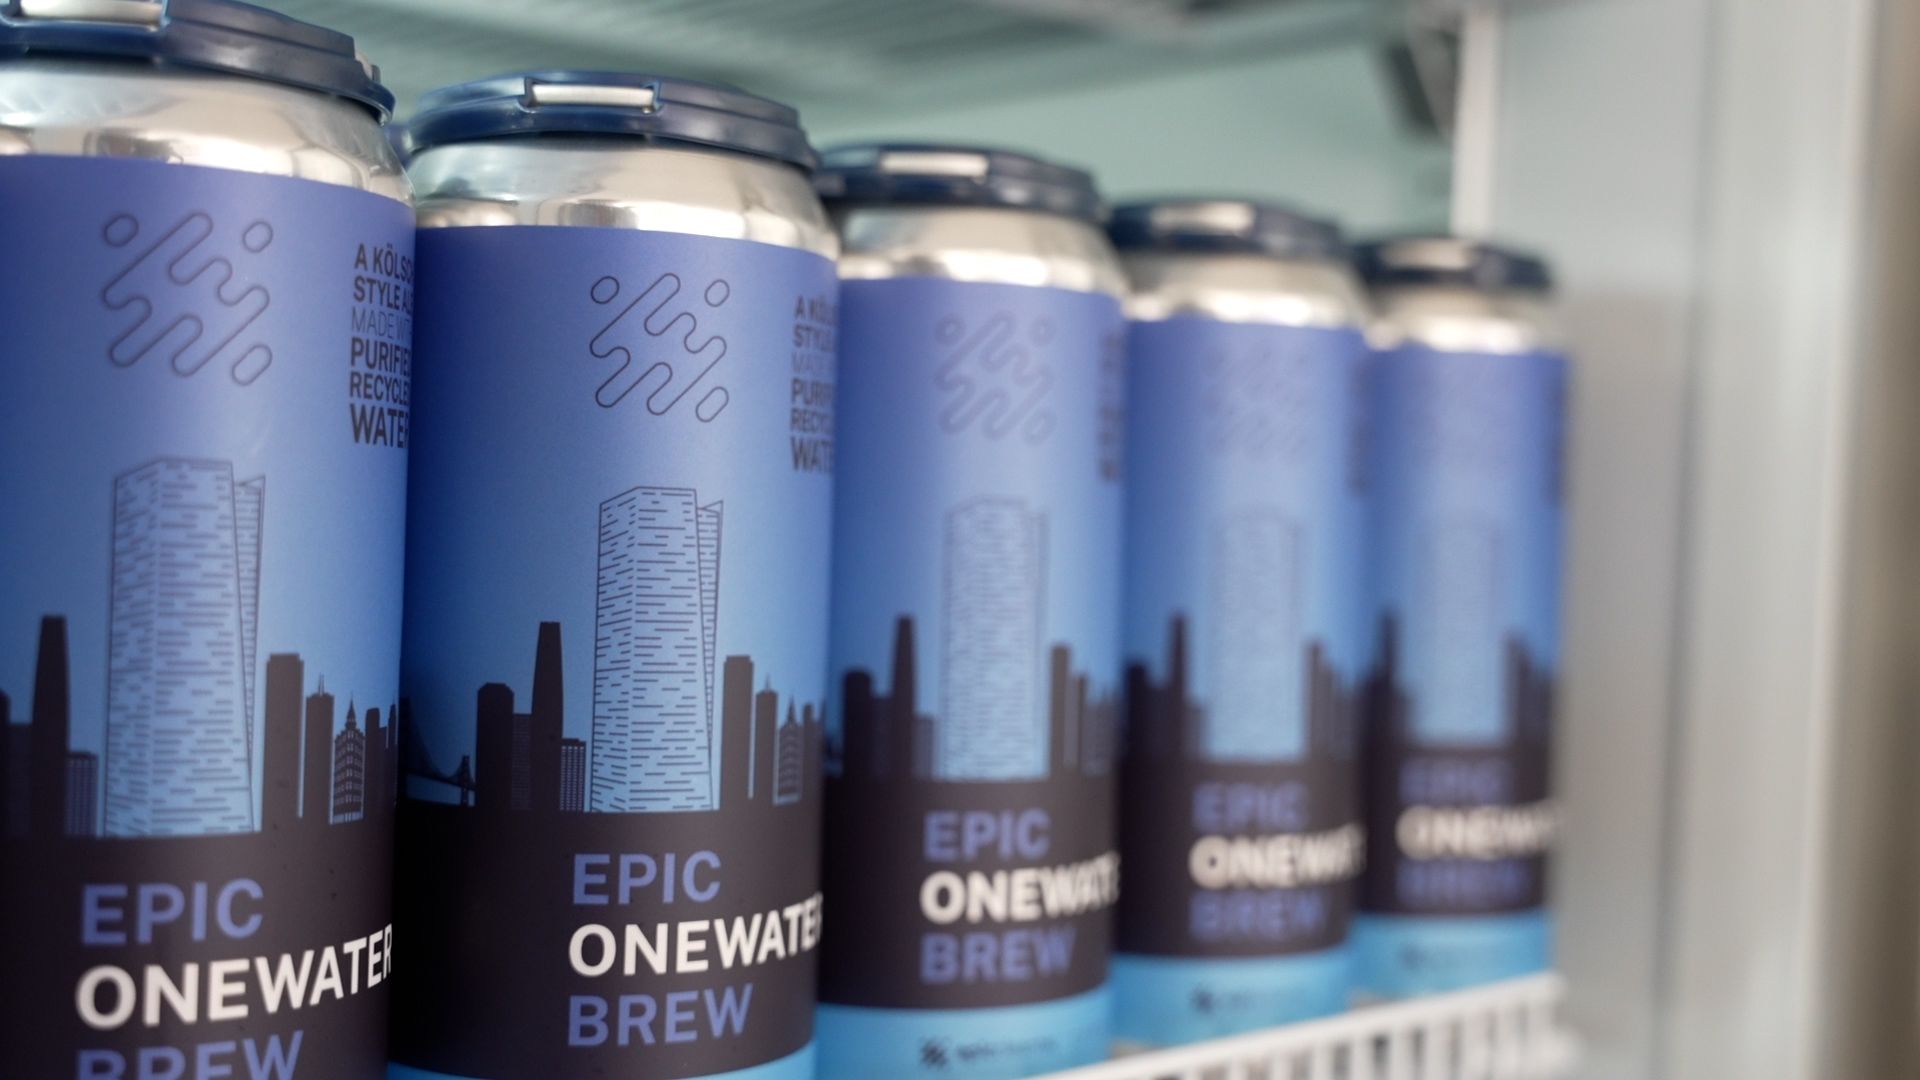 Epic OneWater Brew: The beer made from recycled shower water